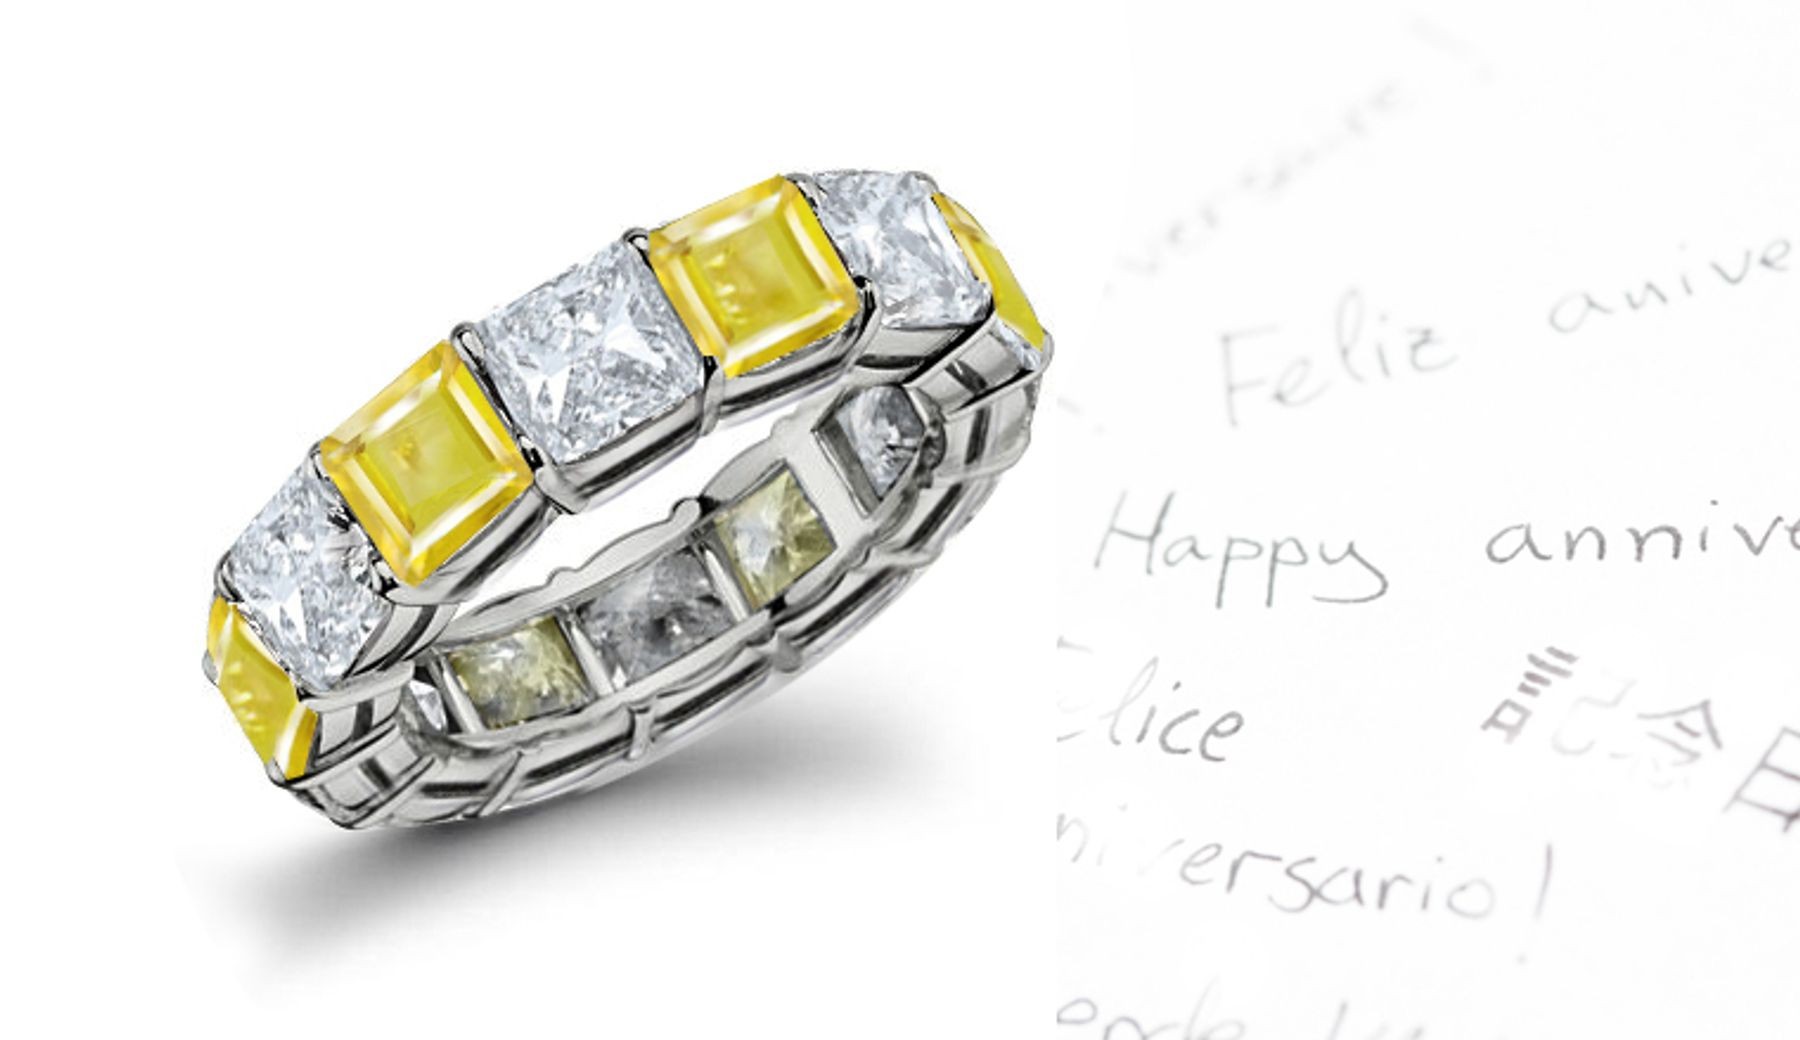 New Arrivals - This Yellow Sapphire & Diamond Ring A Whole Great Radiance